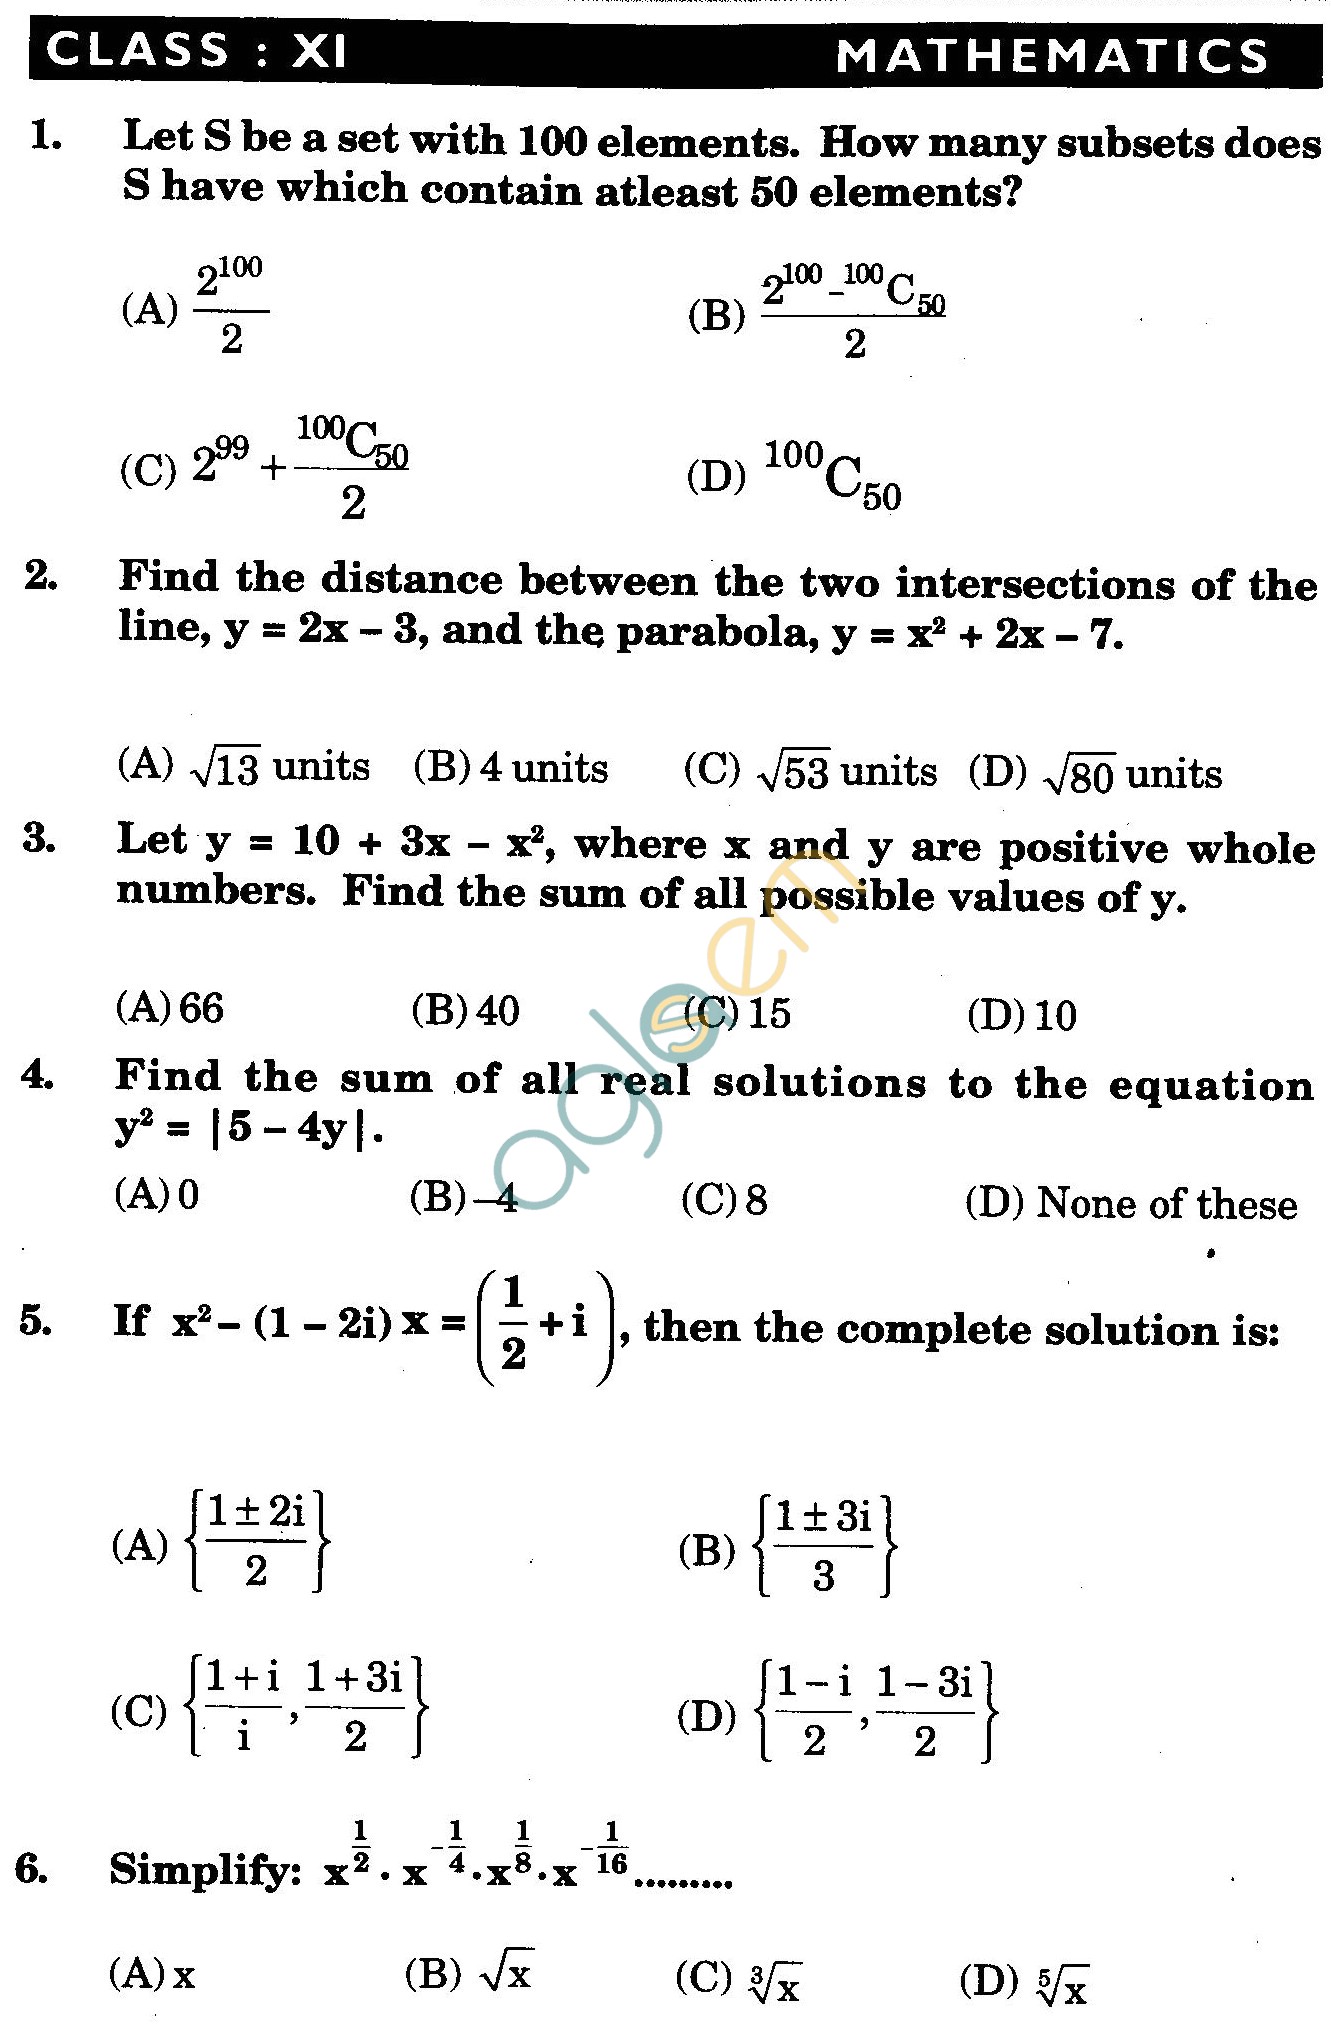 NSTSE 2009 Class XI PCM Question Paper with Answers - Mathematics